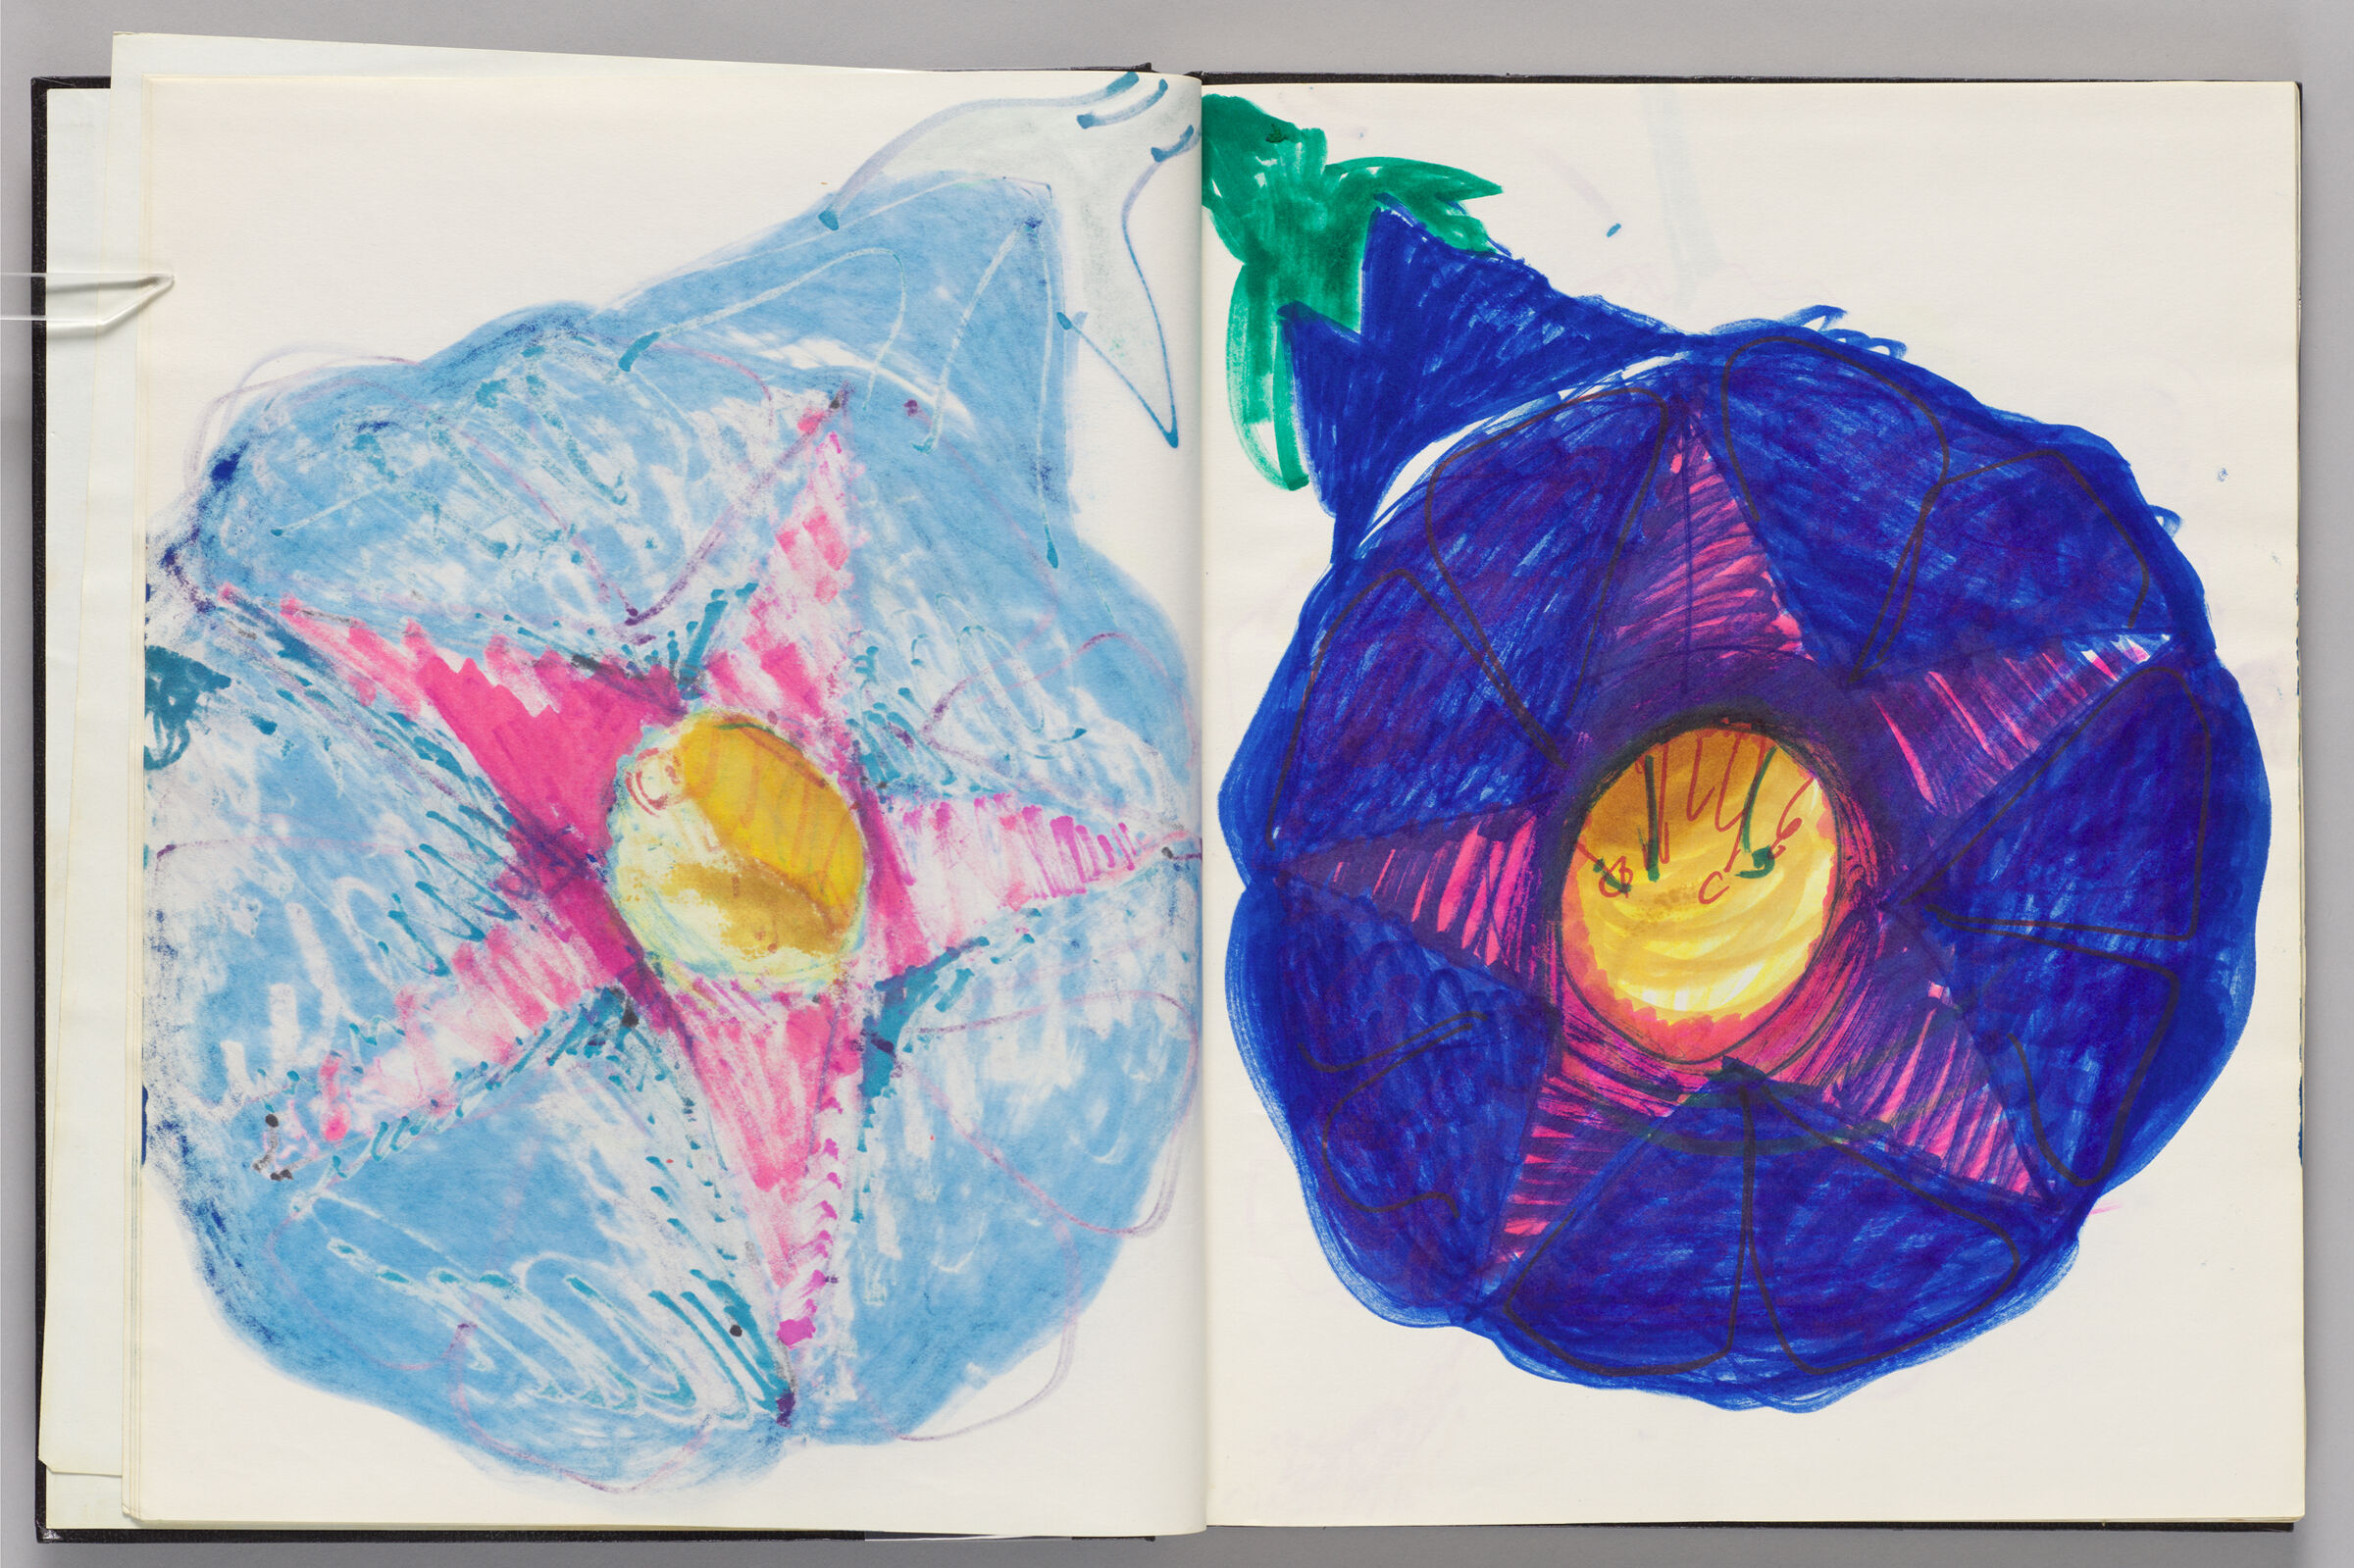 Untitled (Bleed-Through Of Previous Page, Left Page); Untitled (Moon Glory, Right Page)